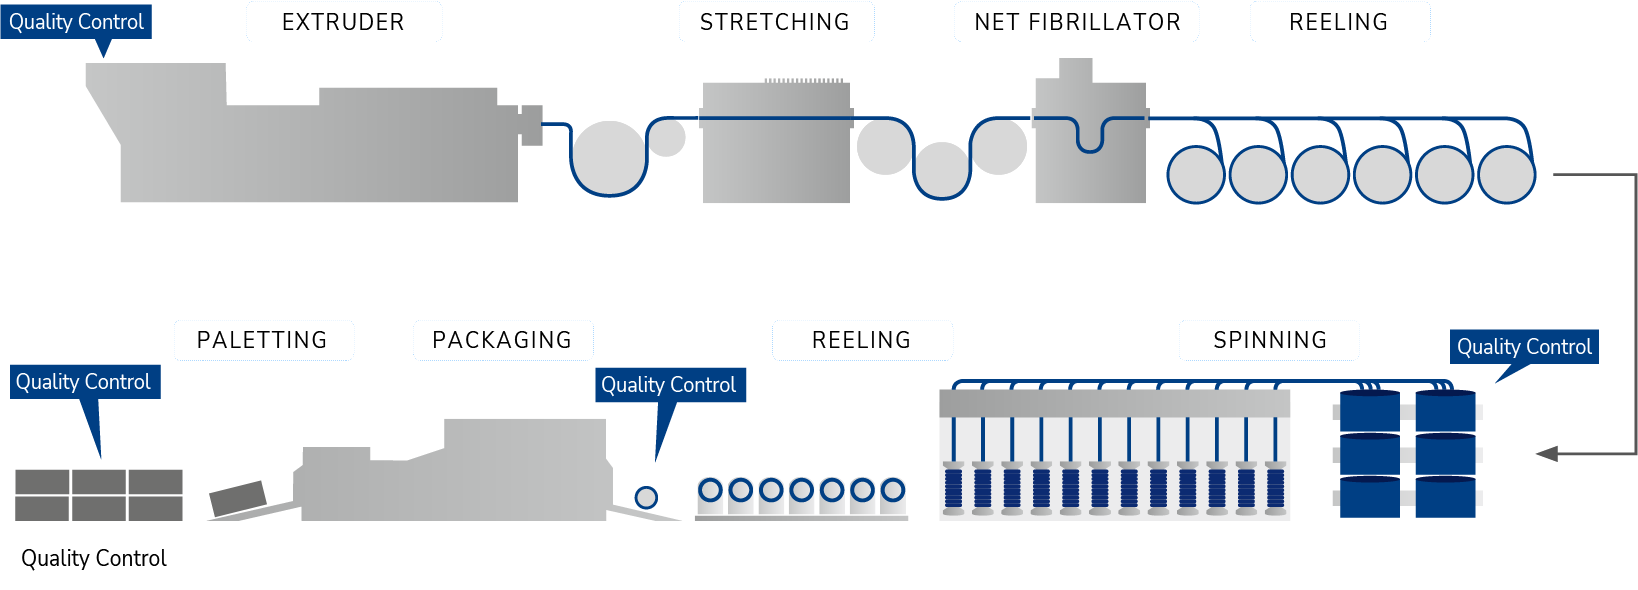 Rope manufacturing and quality control process block diagram